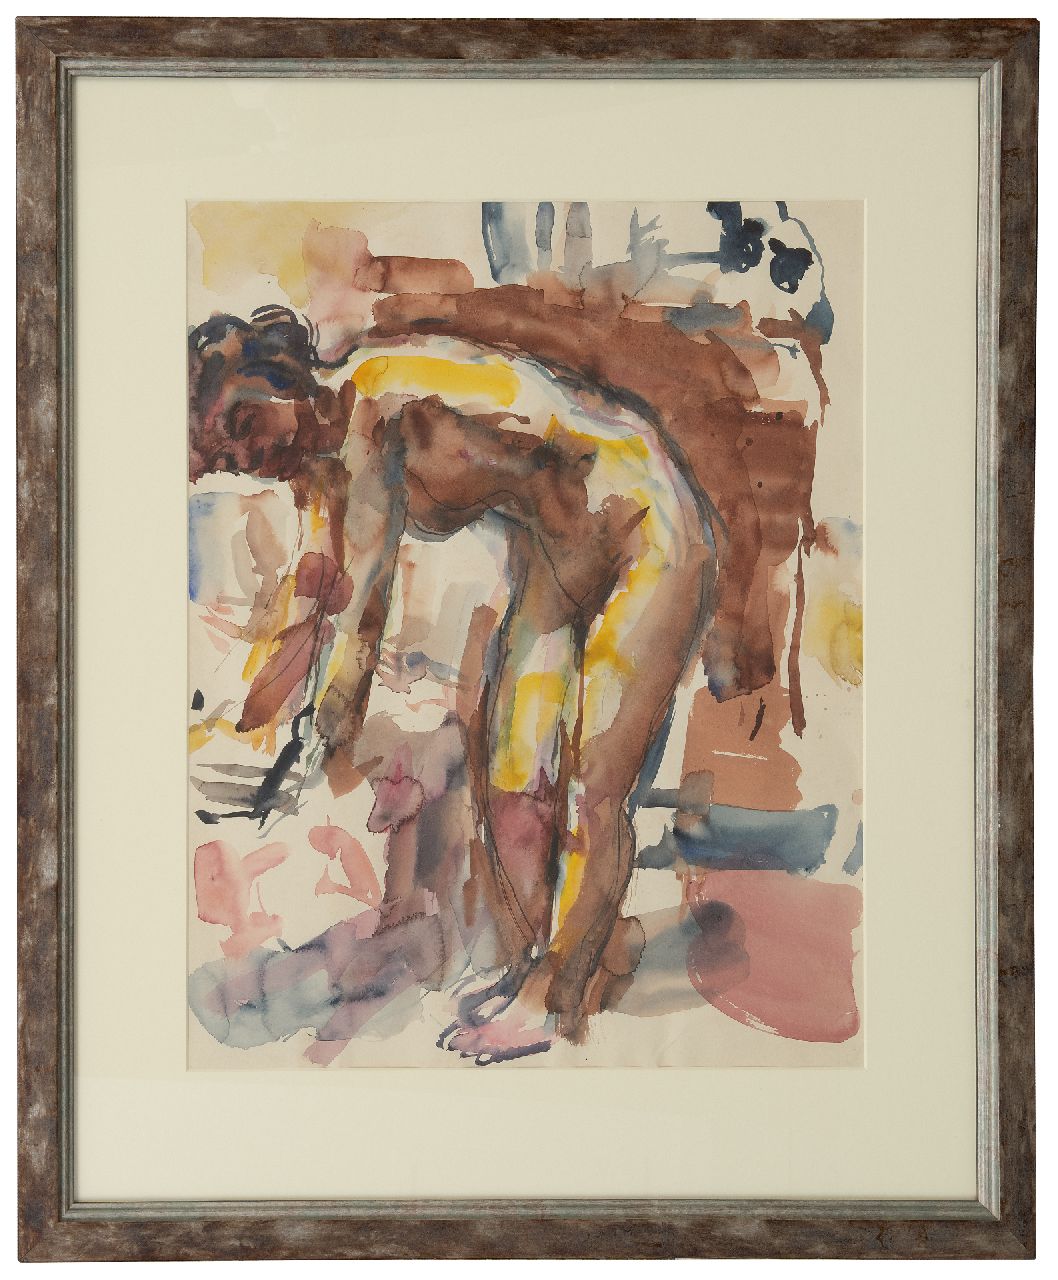 Dijkstra J.  | Johannes 'Johan' Dijkstra | Watercolours and drawings offered for sale | Model in the artist's studio, watercolour on paper 55.5 x 44.0 cm